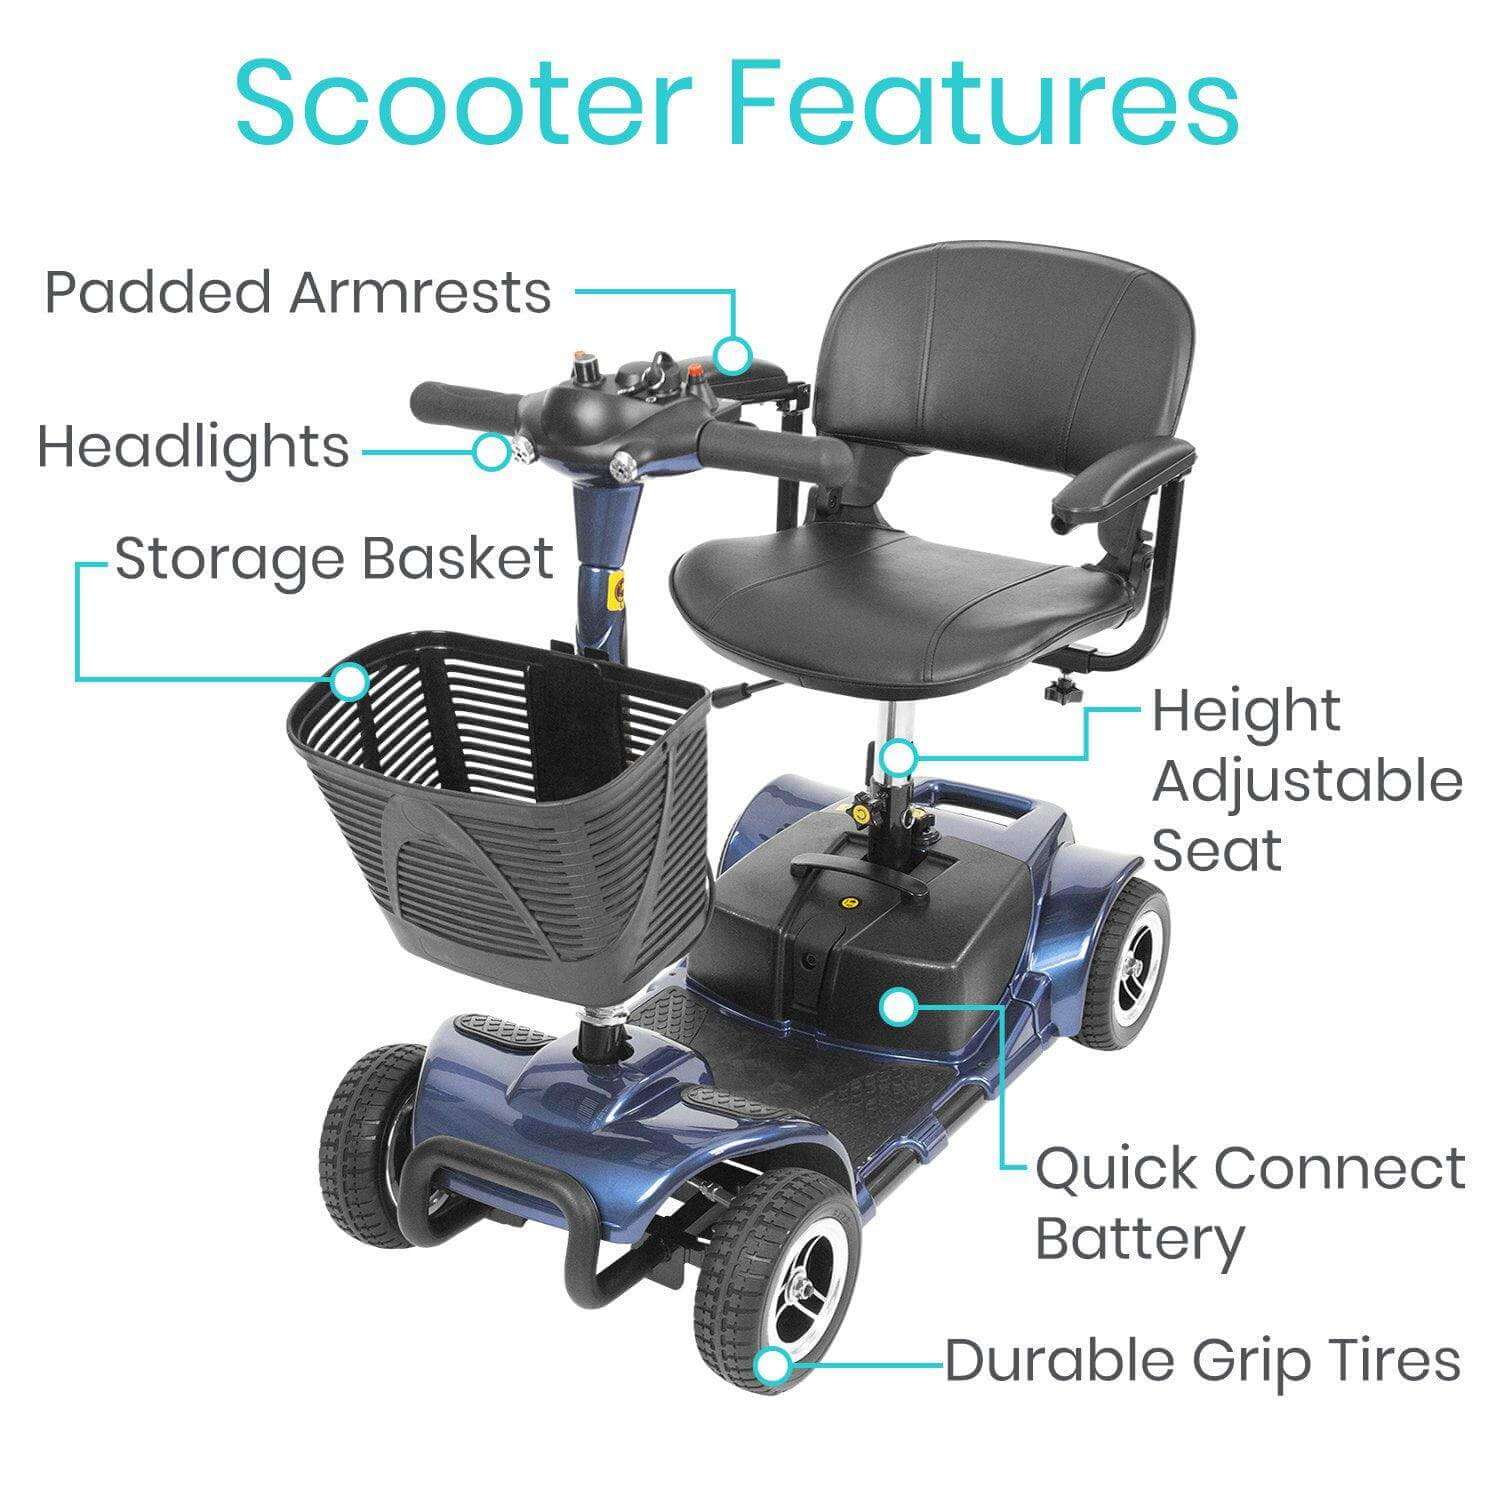 Vive Health 4 Wheel Mobility Scooter - Electric Powered